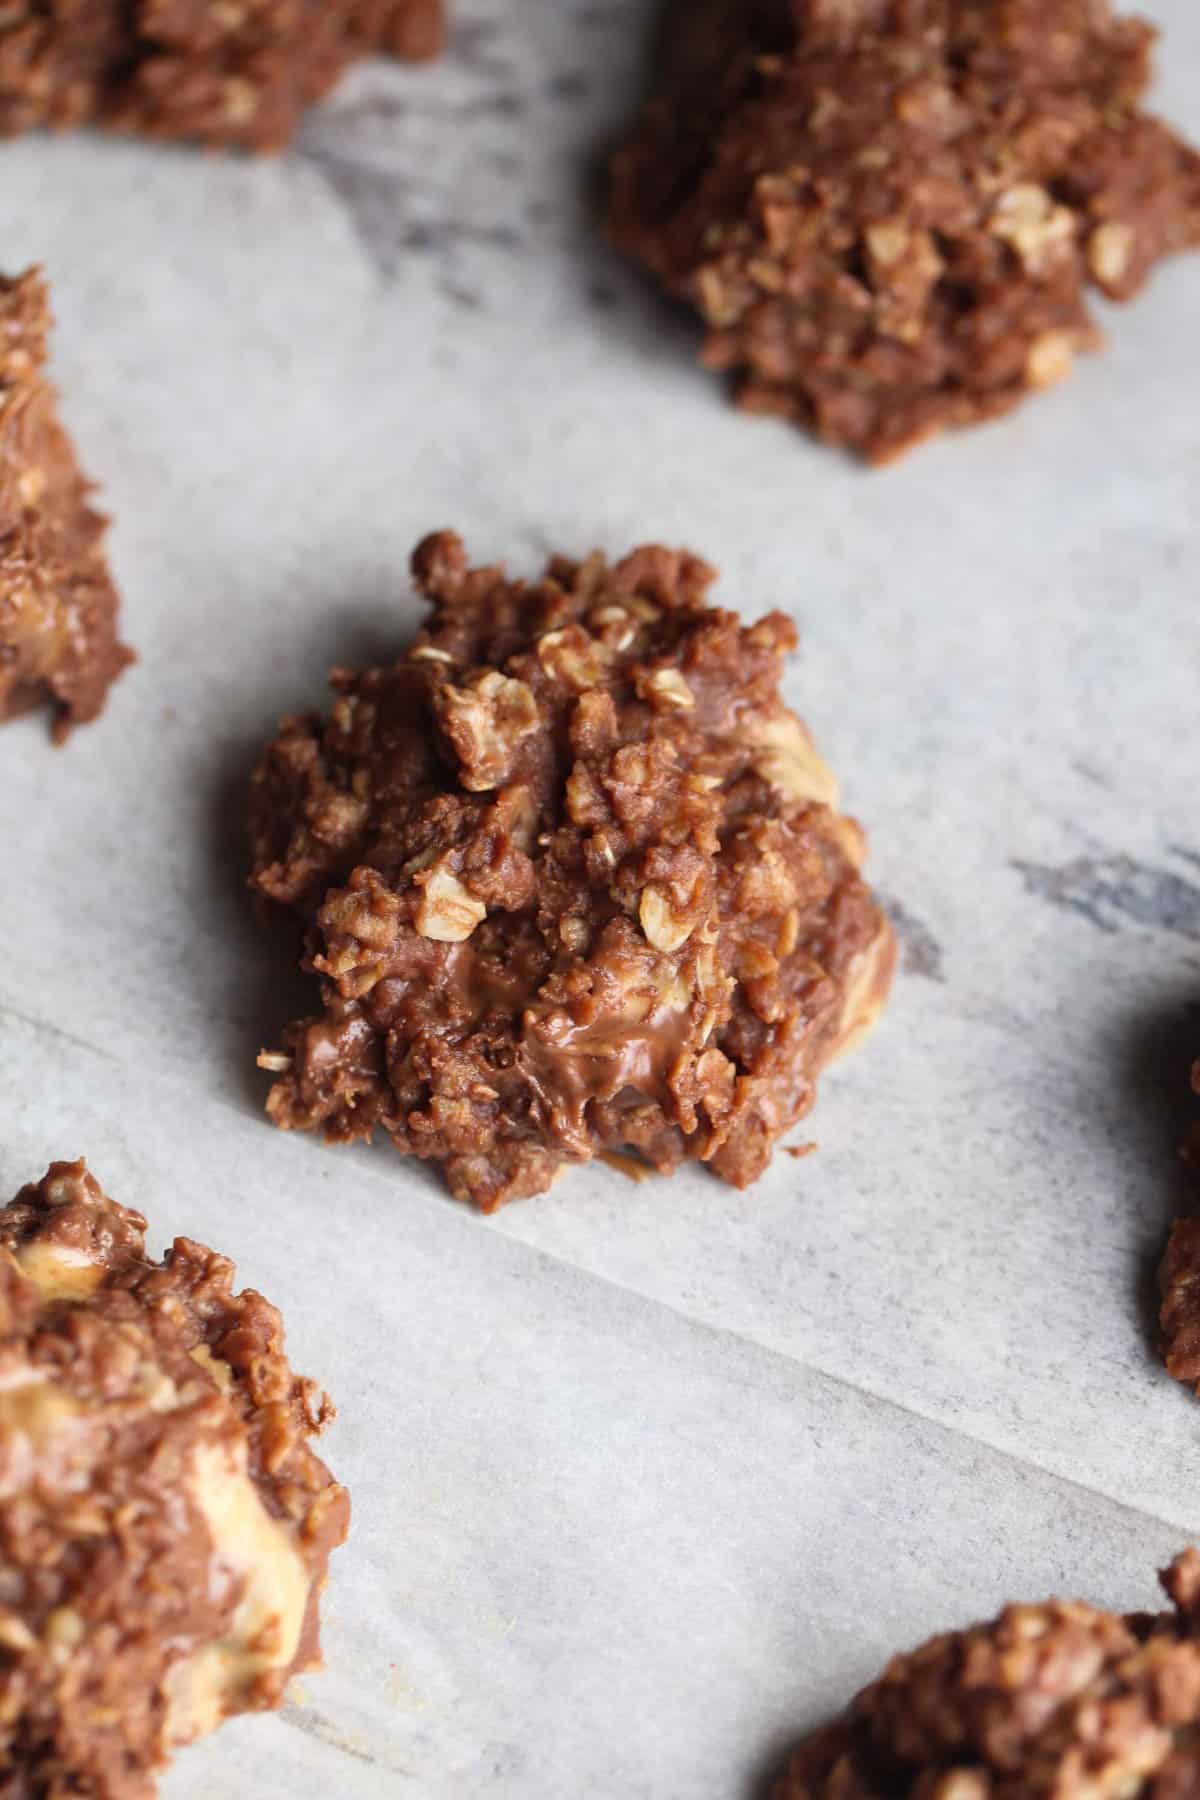 No Bake Cookies setting up on parchment paper